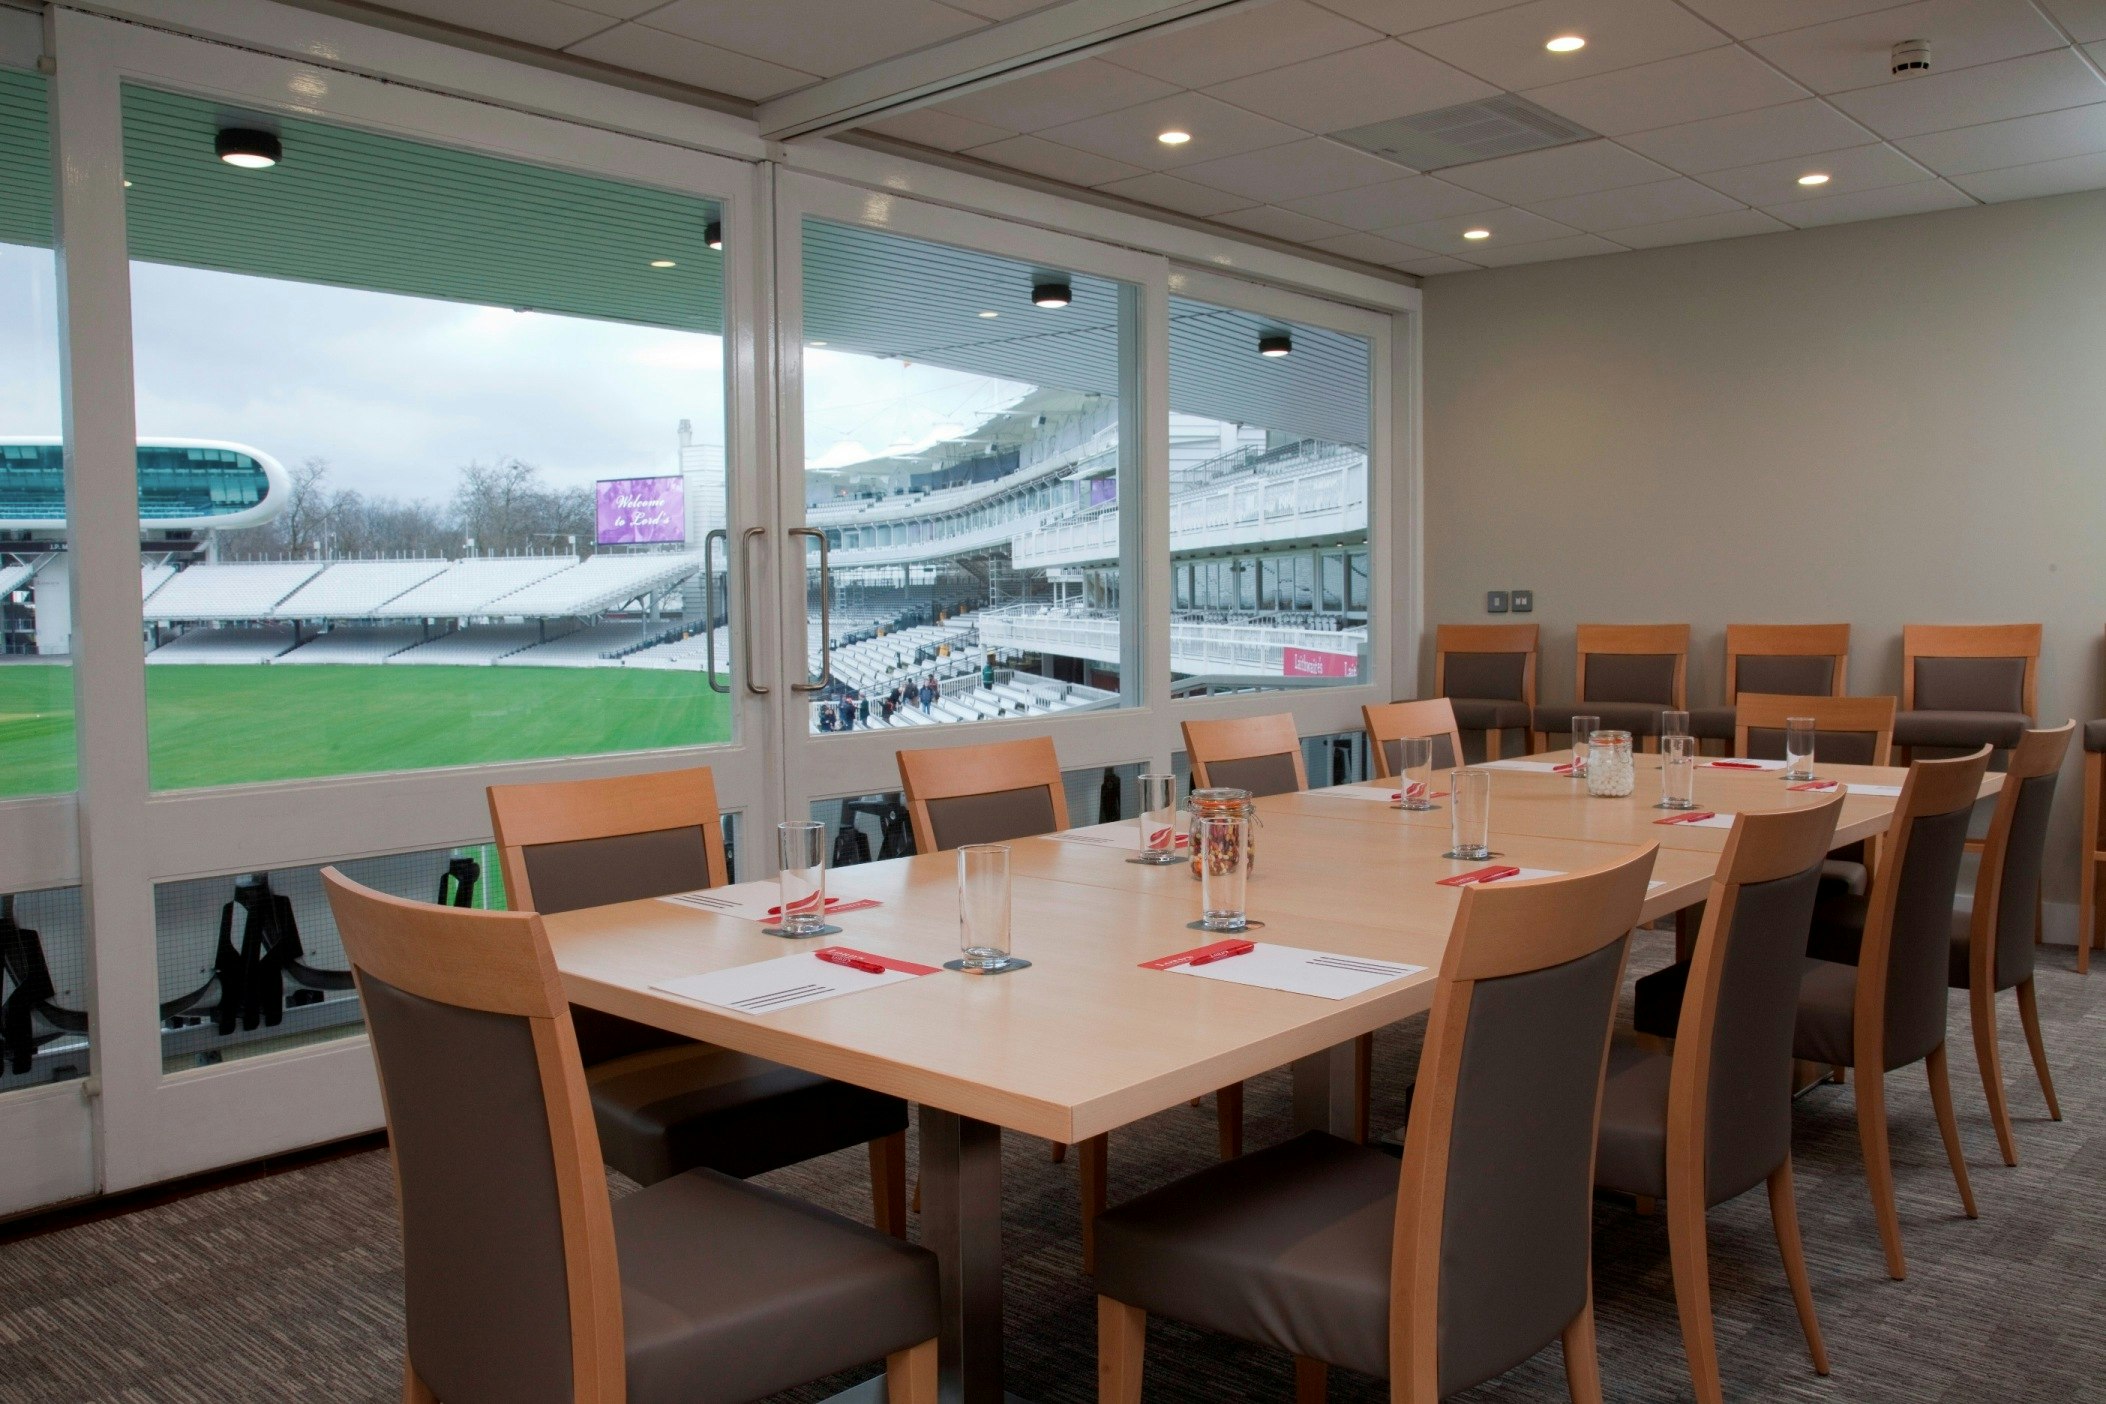 Lord's Cricket Ground - Tavern Meeting Rooms image 1